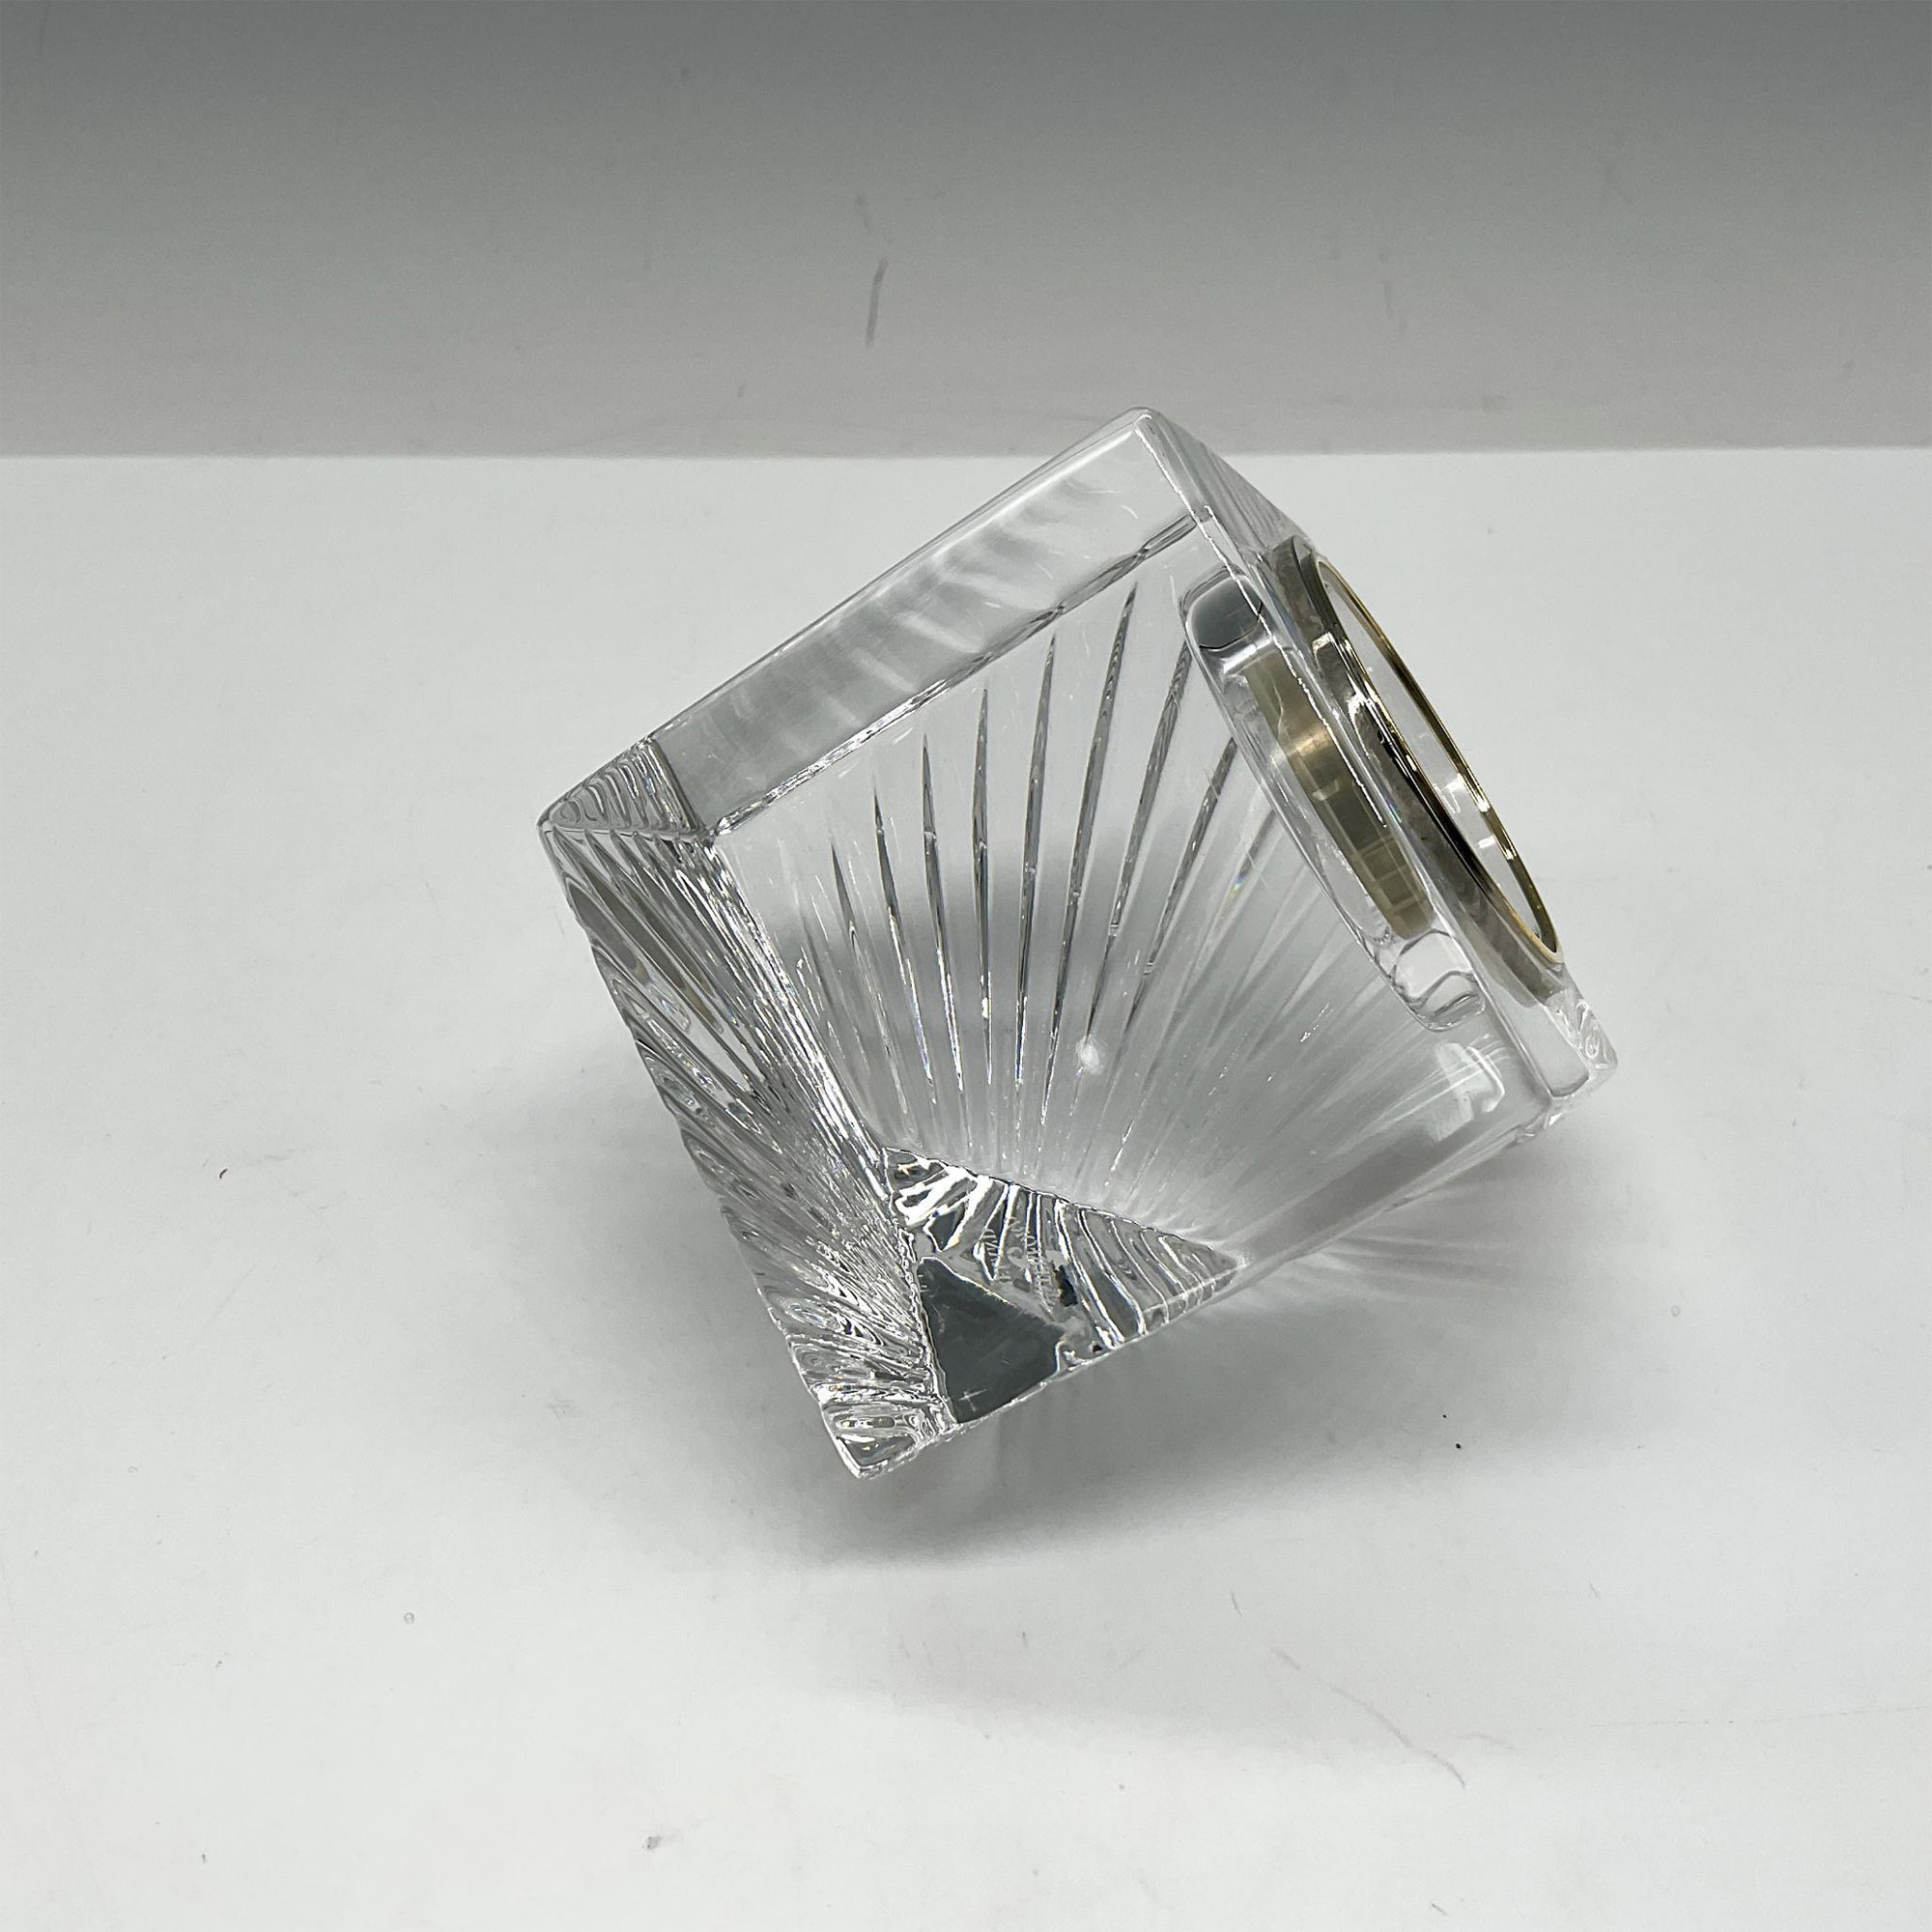 Waterford Crystal Time Pieces, Meridian Cube Desk Clock - Image 2 of 4